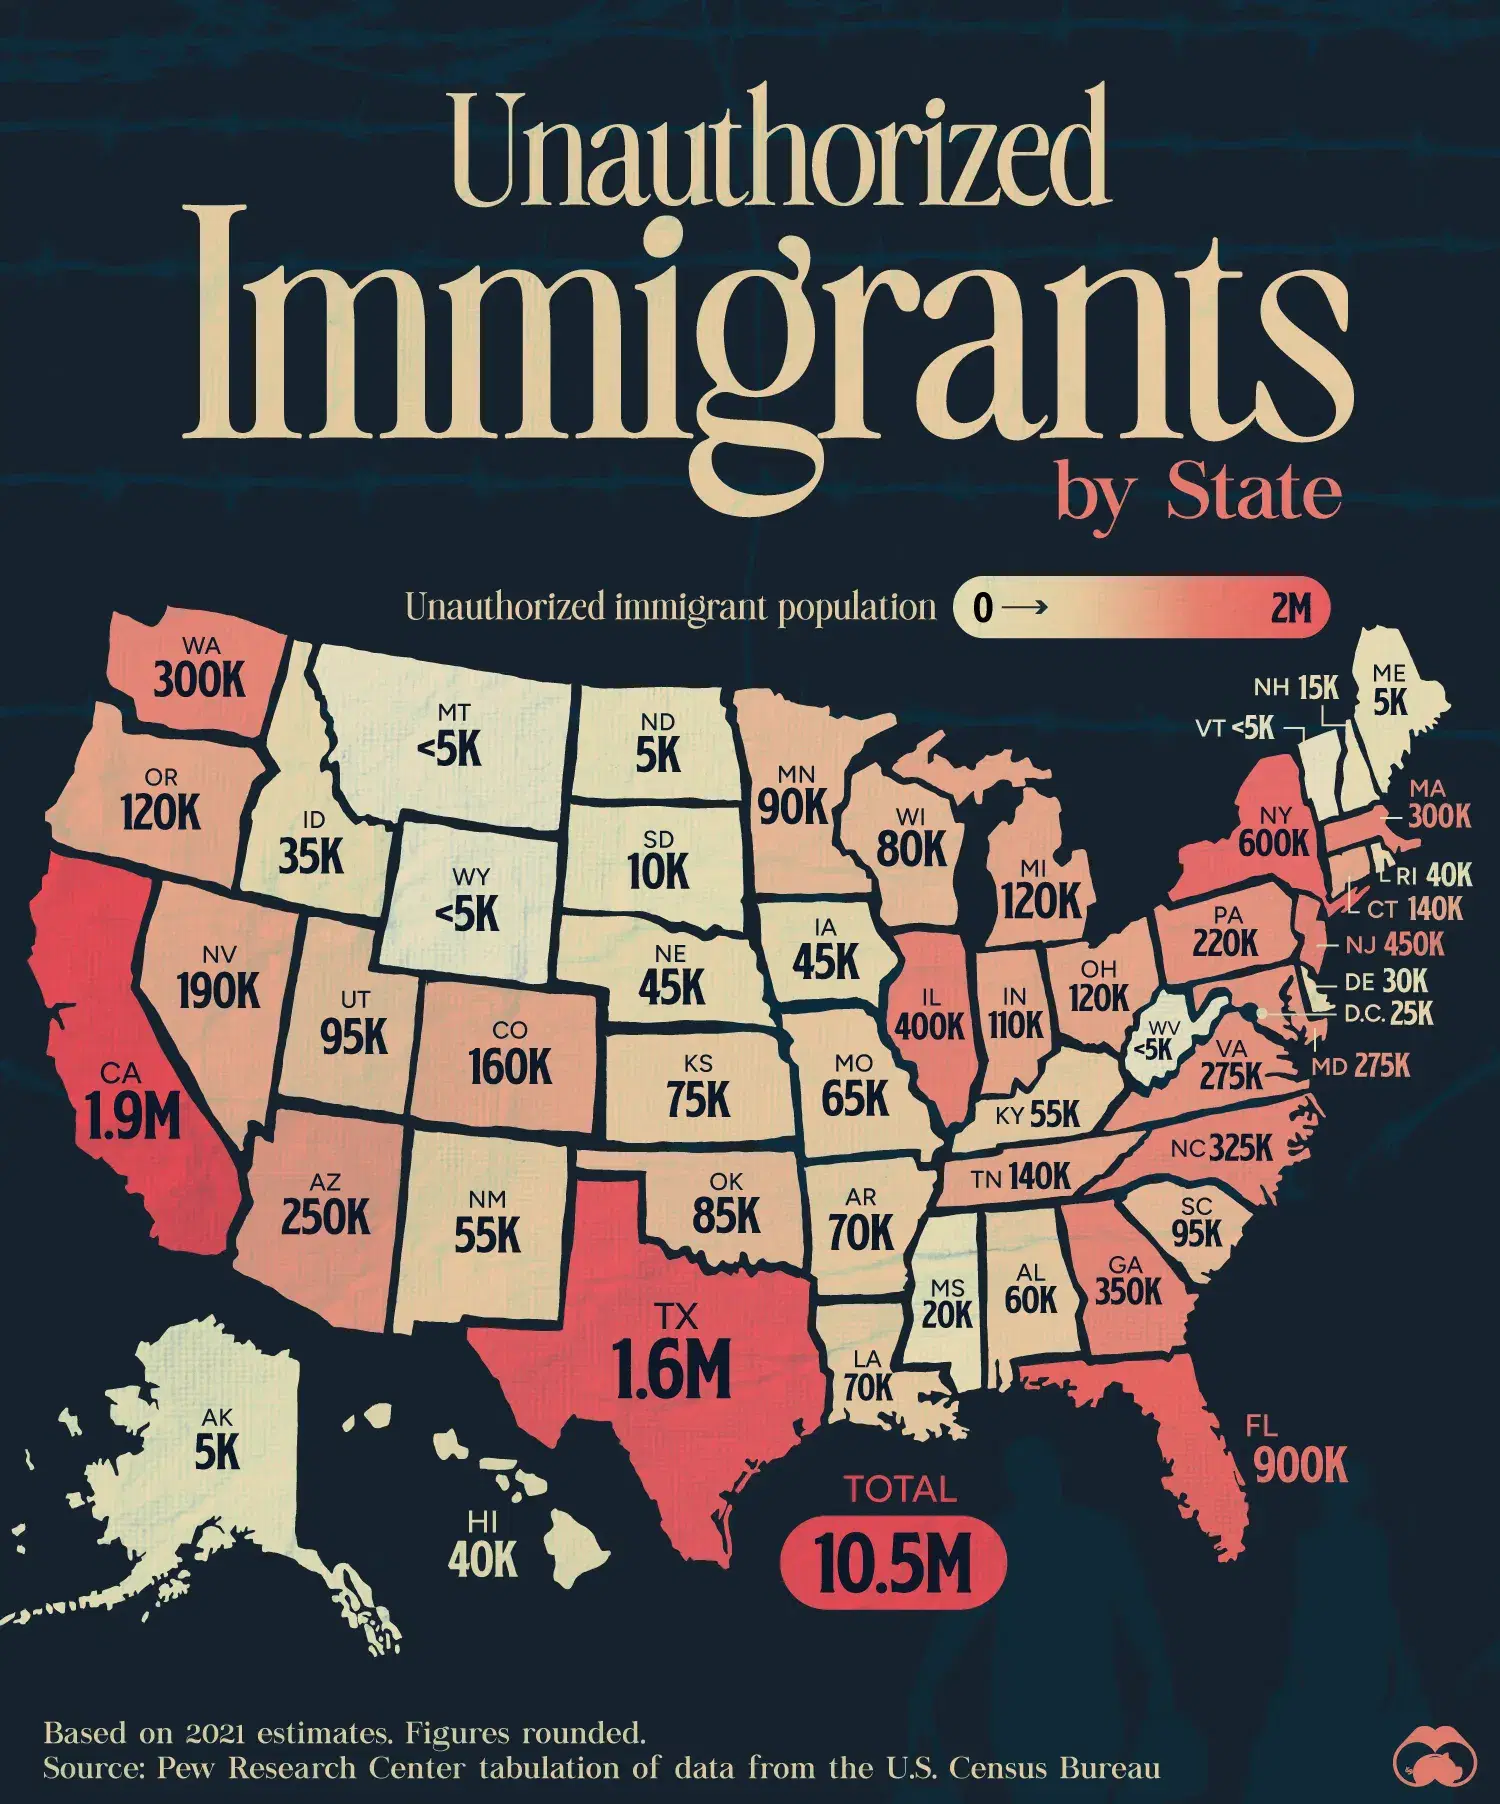 California, Texas, and Florida Concentrate Over 40% of Unauthorized Immigrants